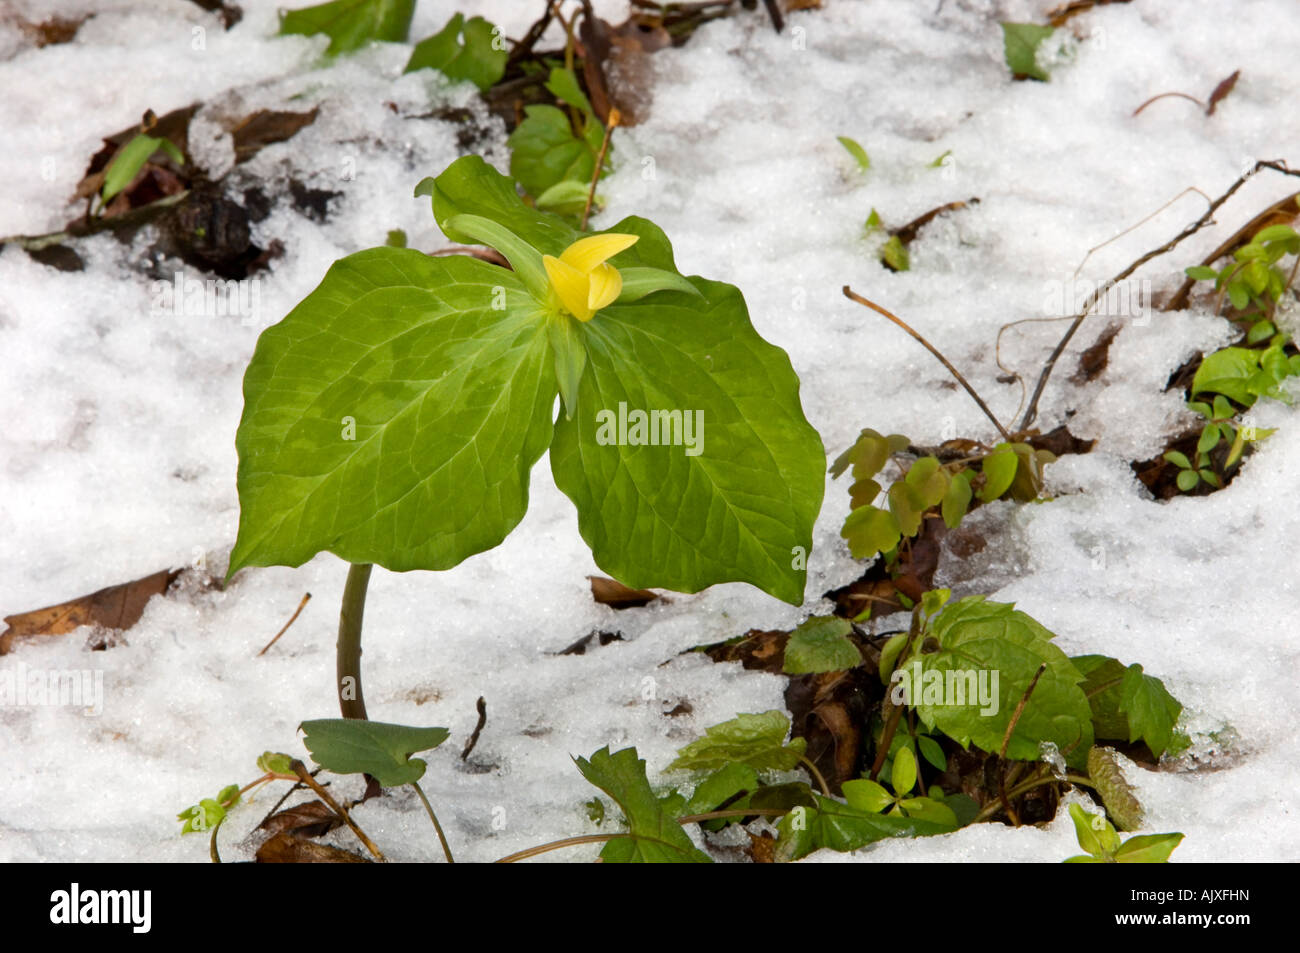 Yellow trillium (Trillium luteum) in spring snow, Great Smoky Mountains National Park, Tennessee, USA Stock Photo